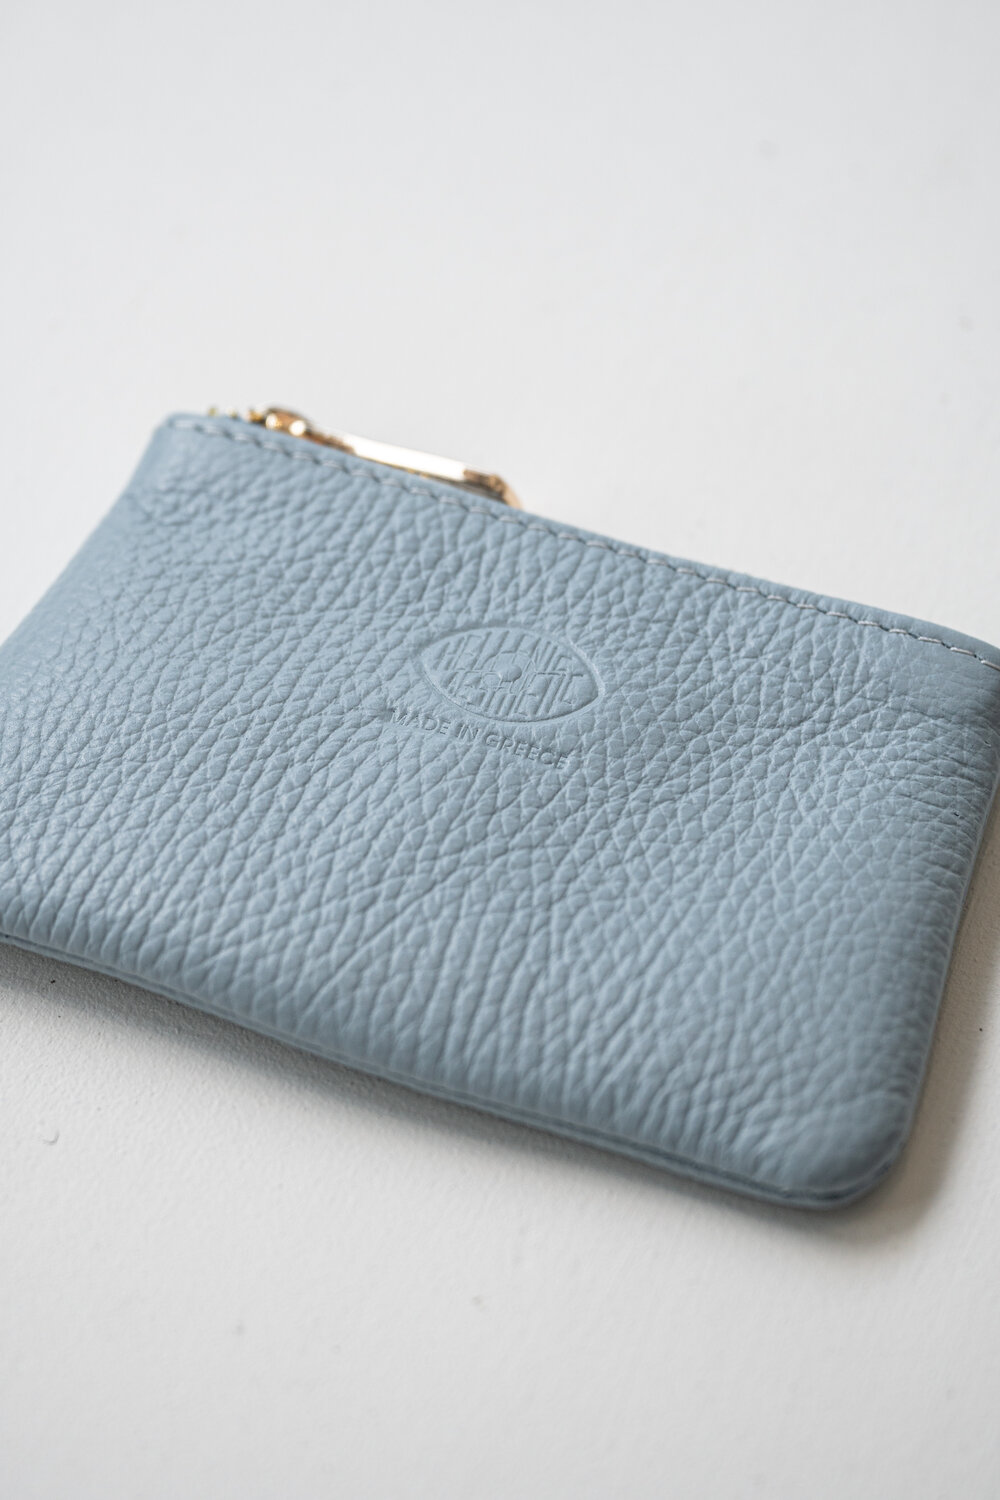 Small Leather Zipper Pouch